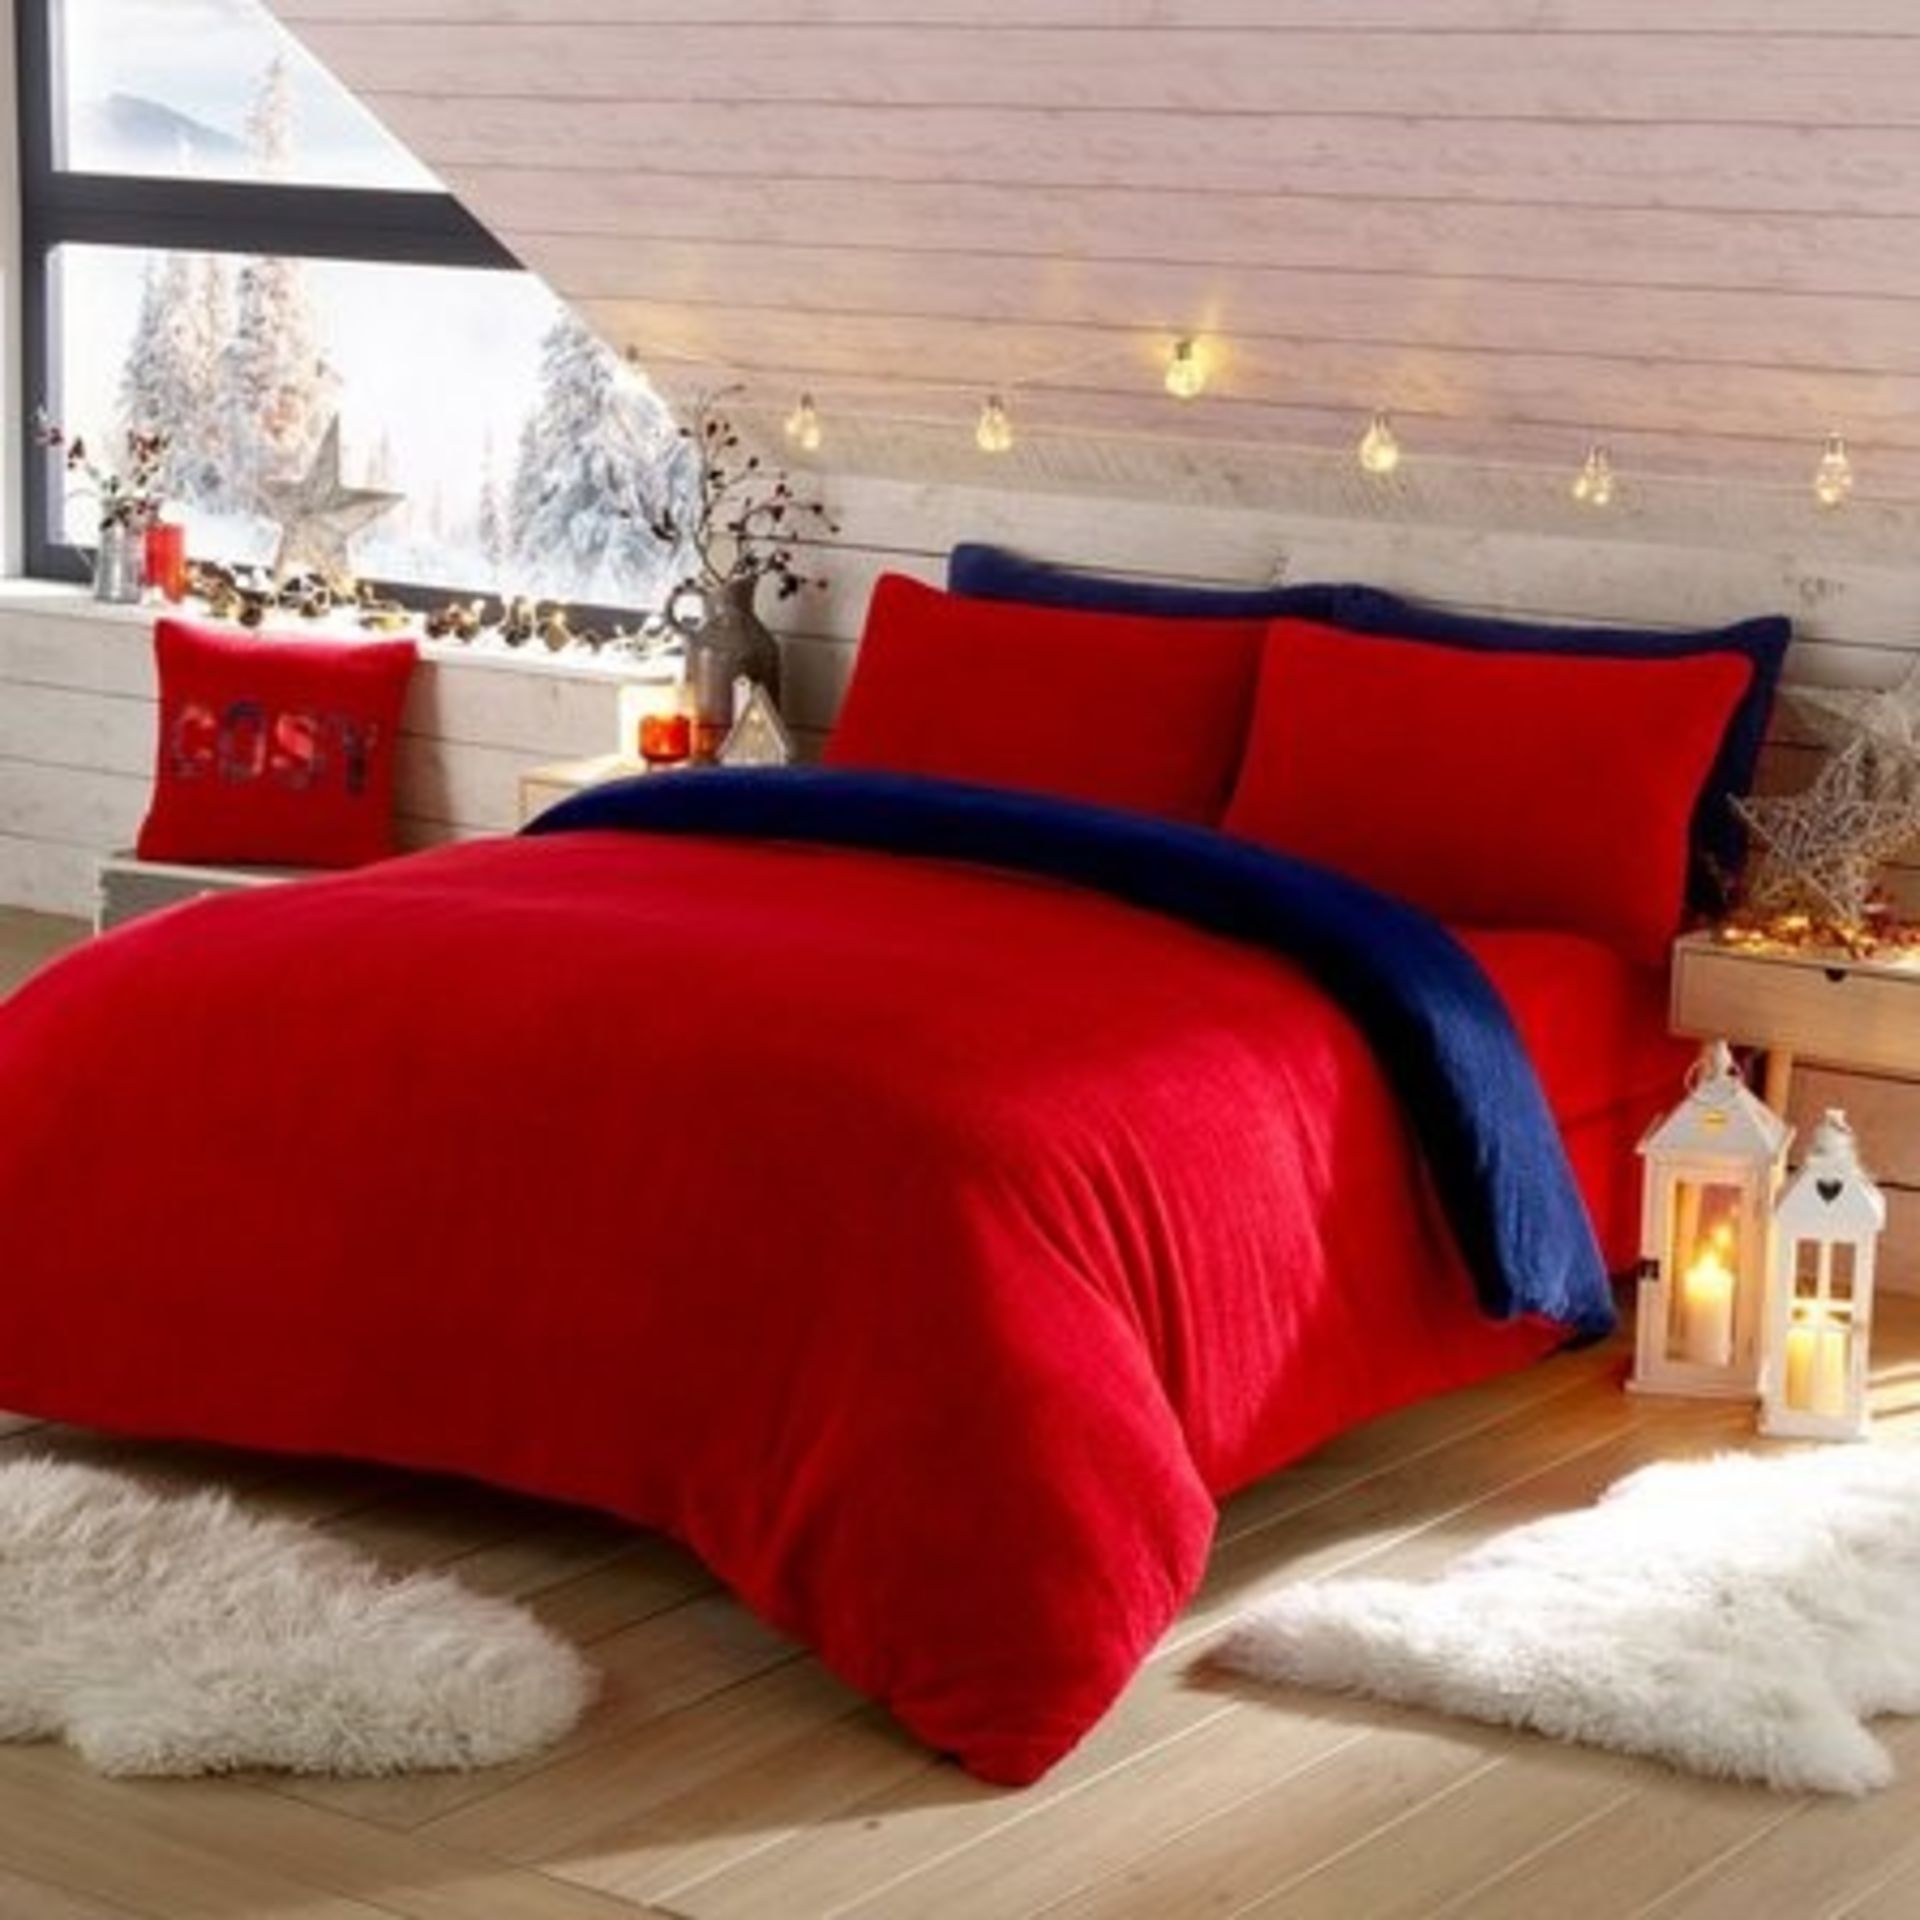 1 AS NEW PACKAGED WARM AND COSY TEDDY FLEECE KING DUVET SET IN RED, BLUE (VIEWING HIGHLY